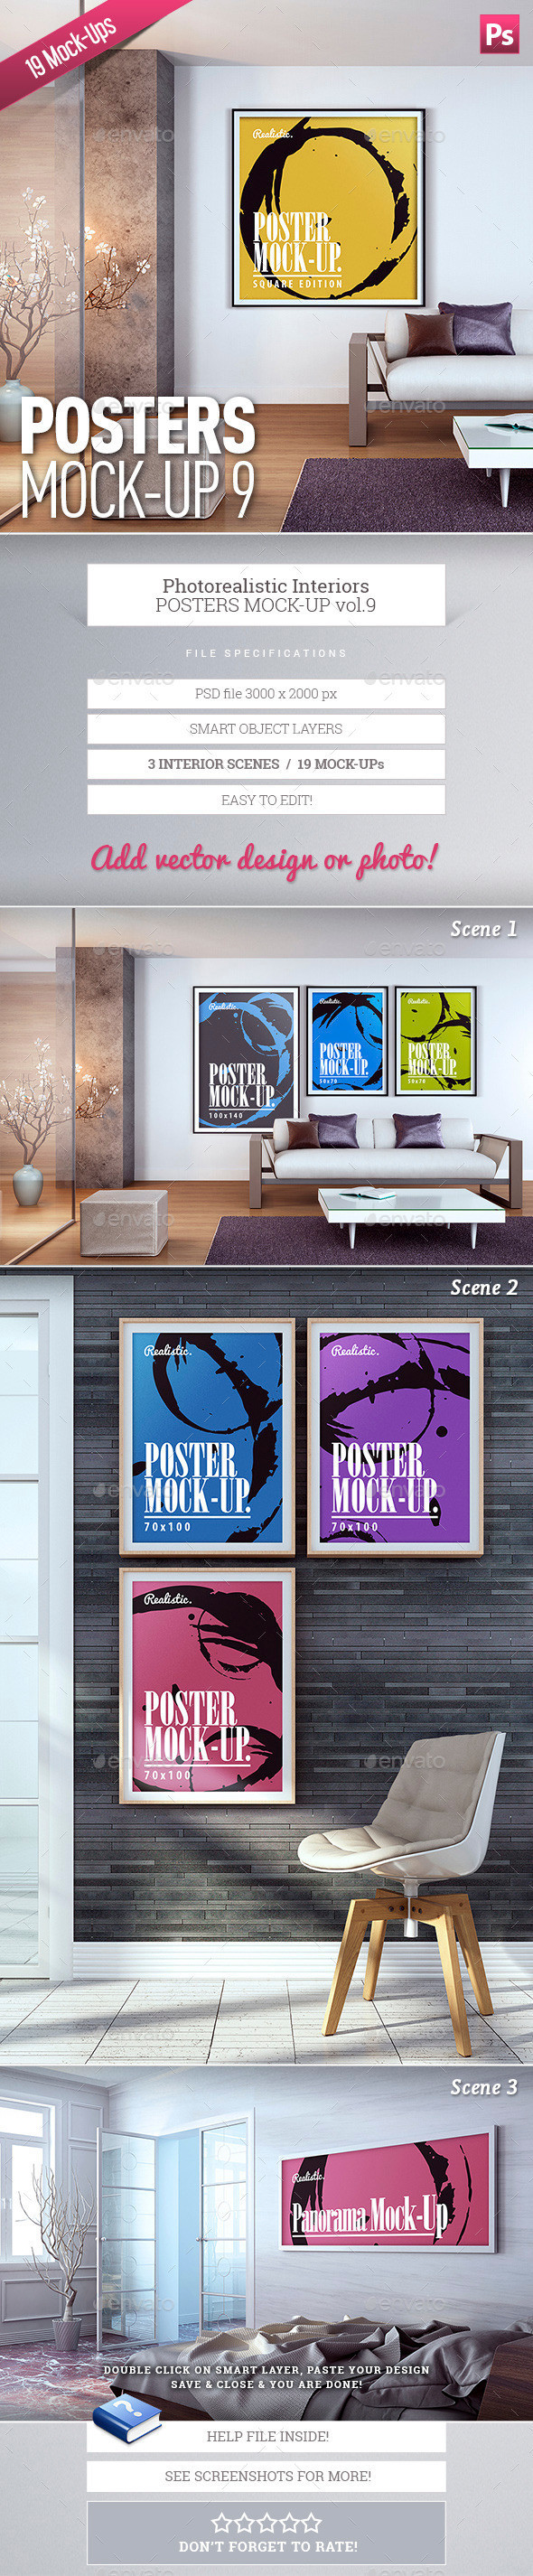 Posters 20mock up 20vol9 20file 20preview